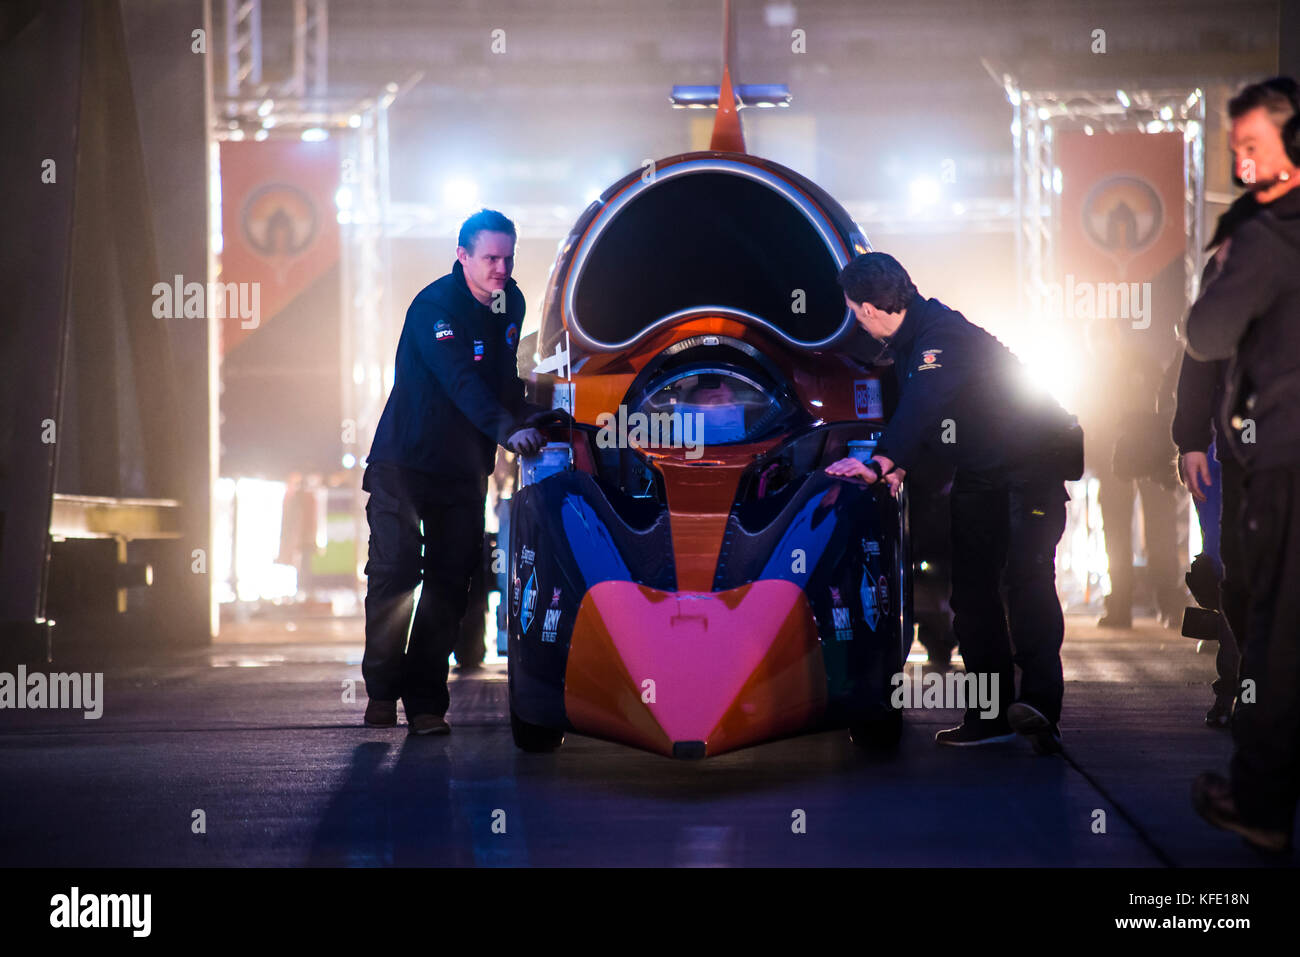 Bloodhound SSC supersonic car being rolled out of a hangar for the world media before testing at Cornwall Airport Newquay Stock Photo